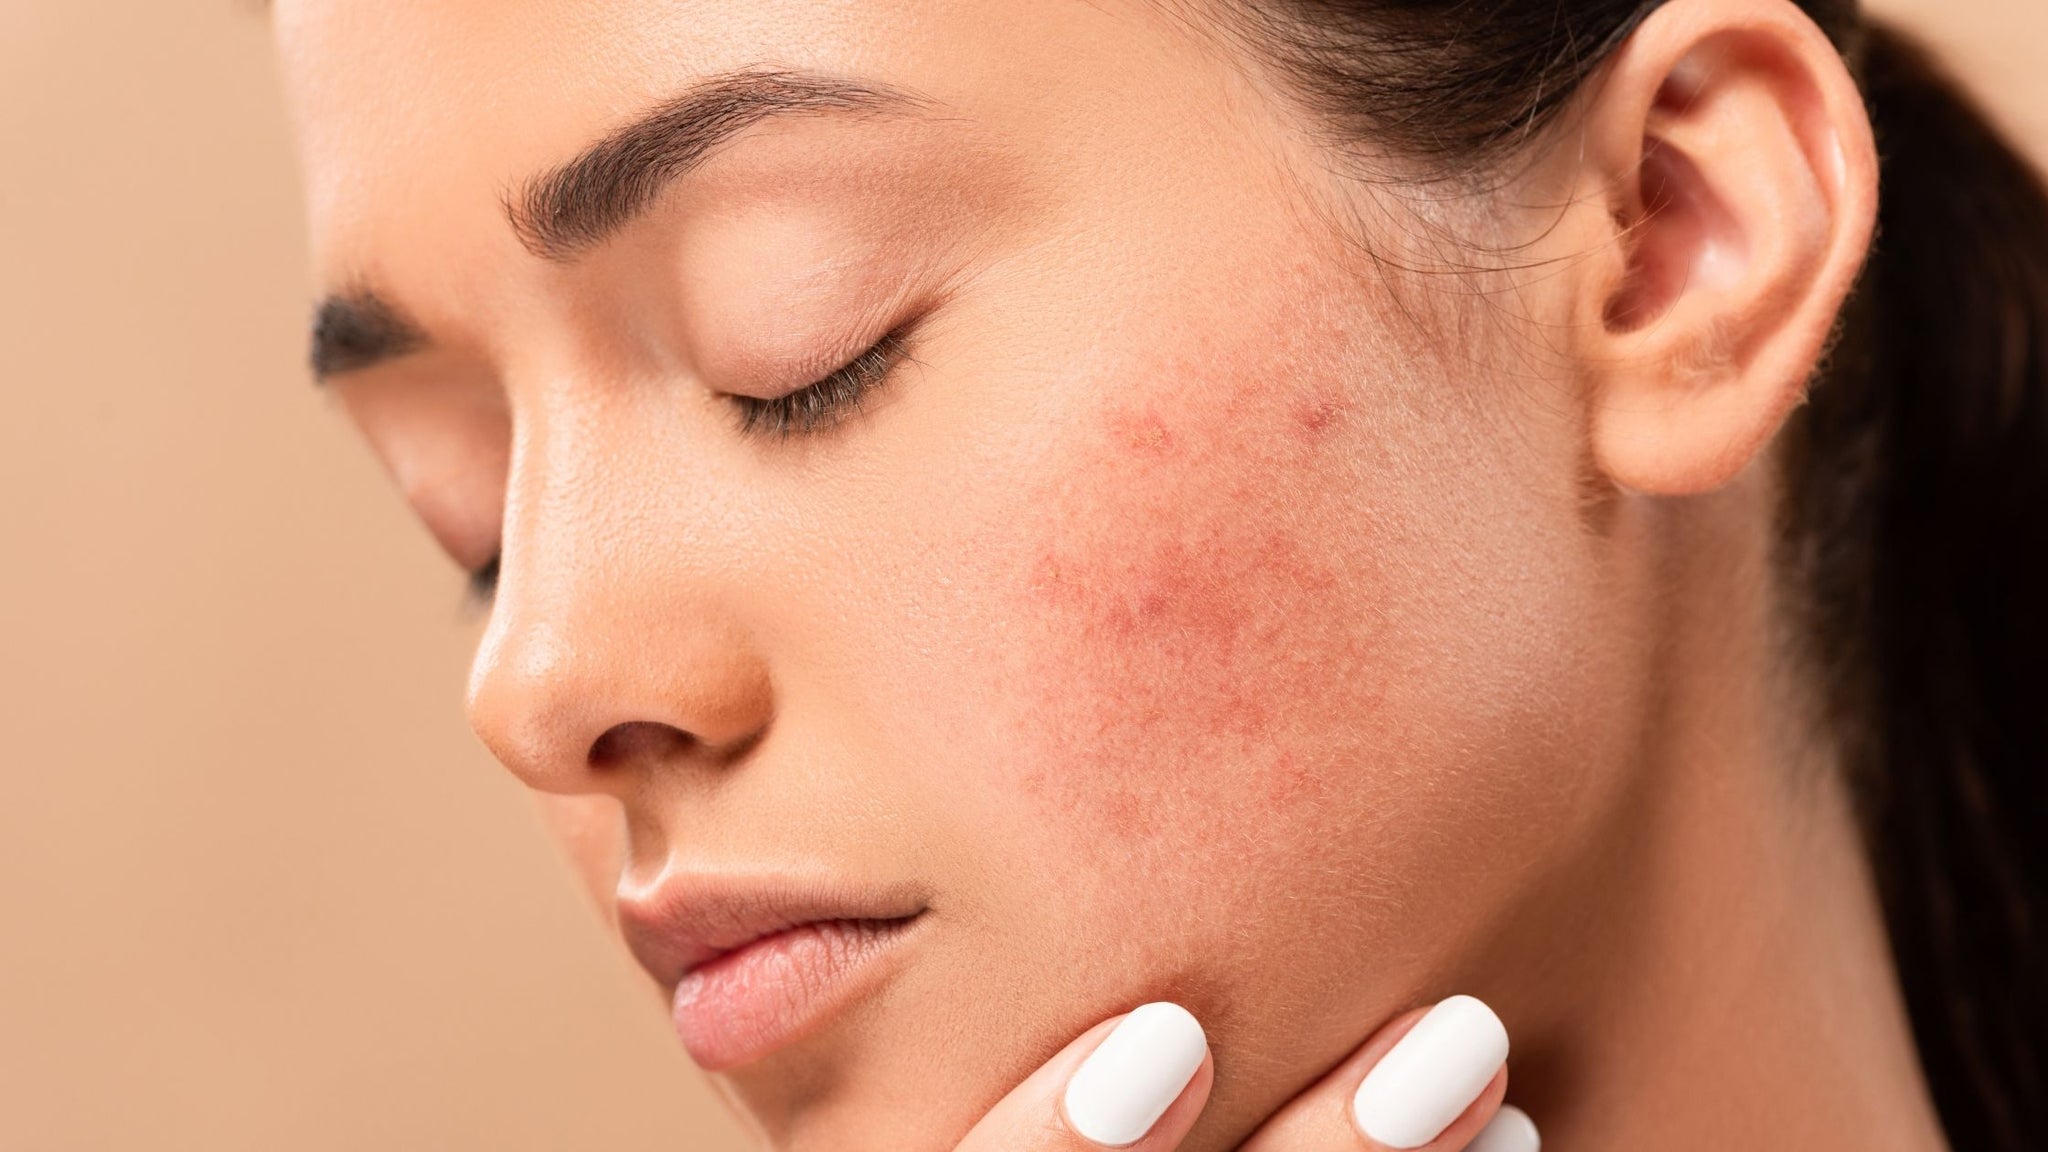 Hormonal Acne: Causes and Prevention